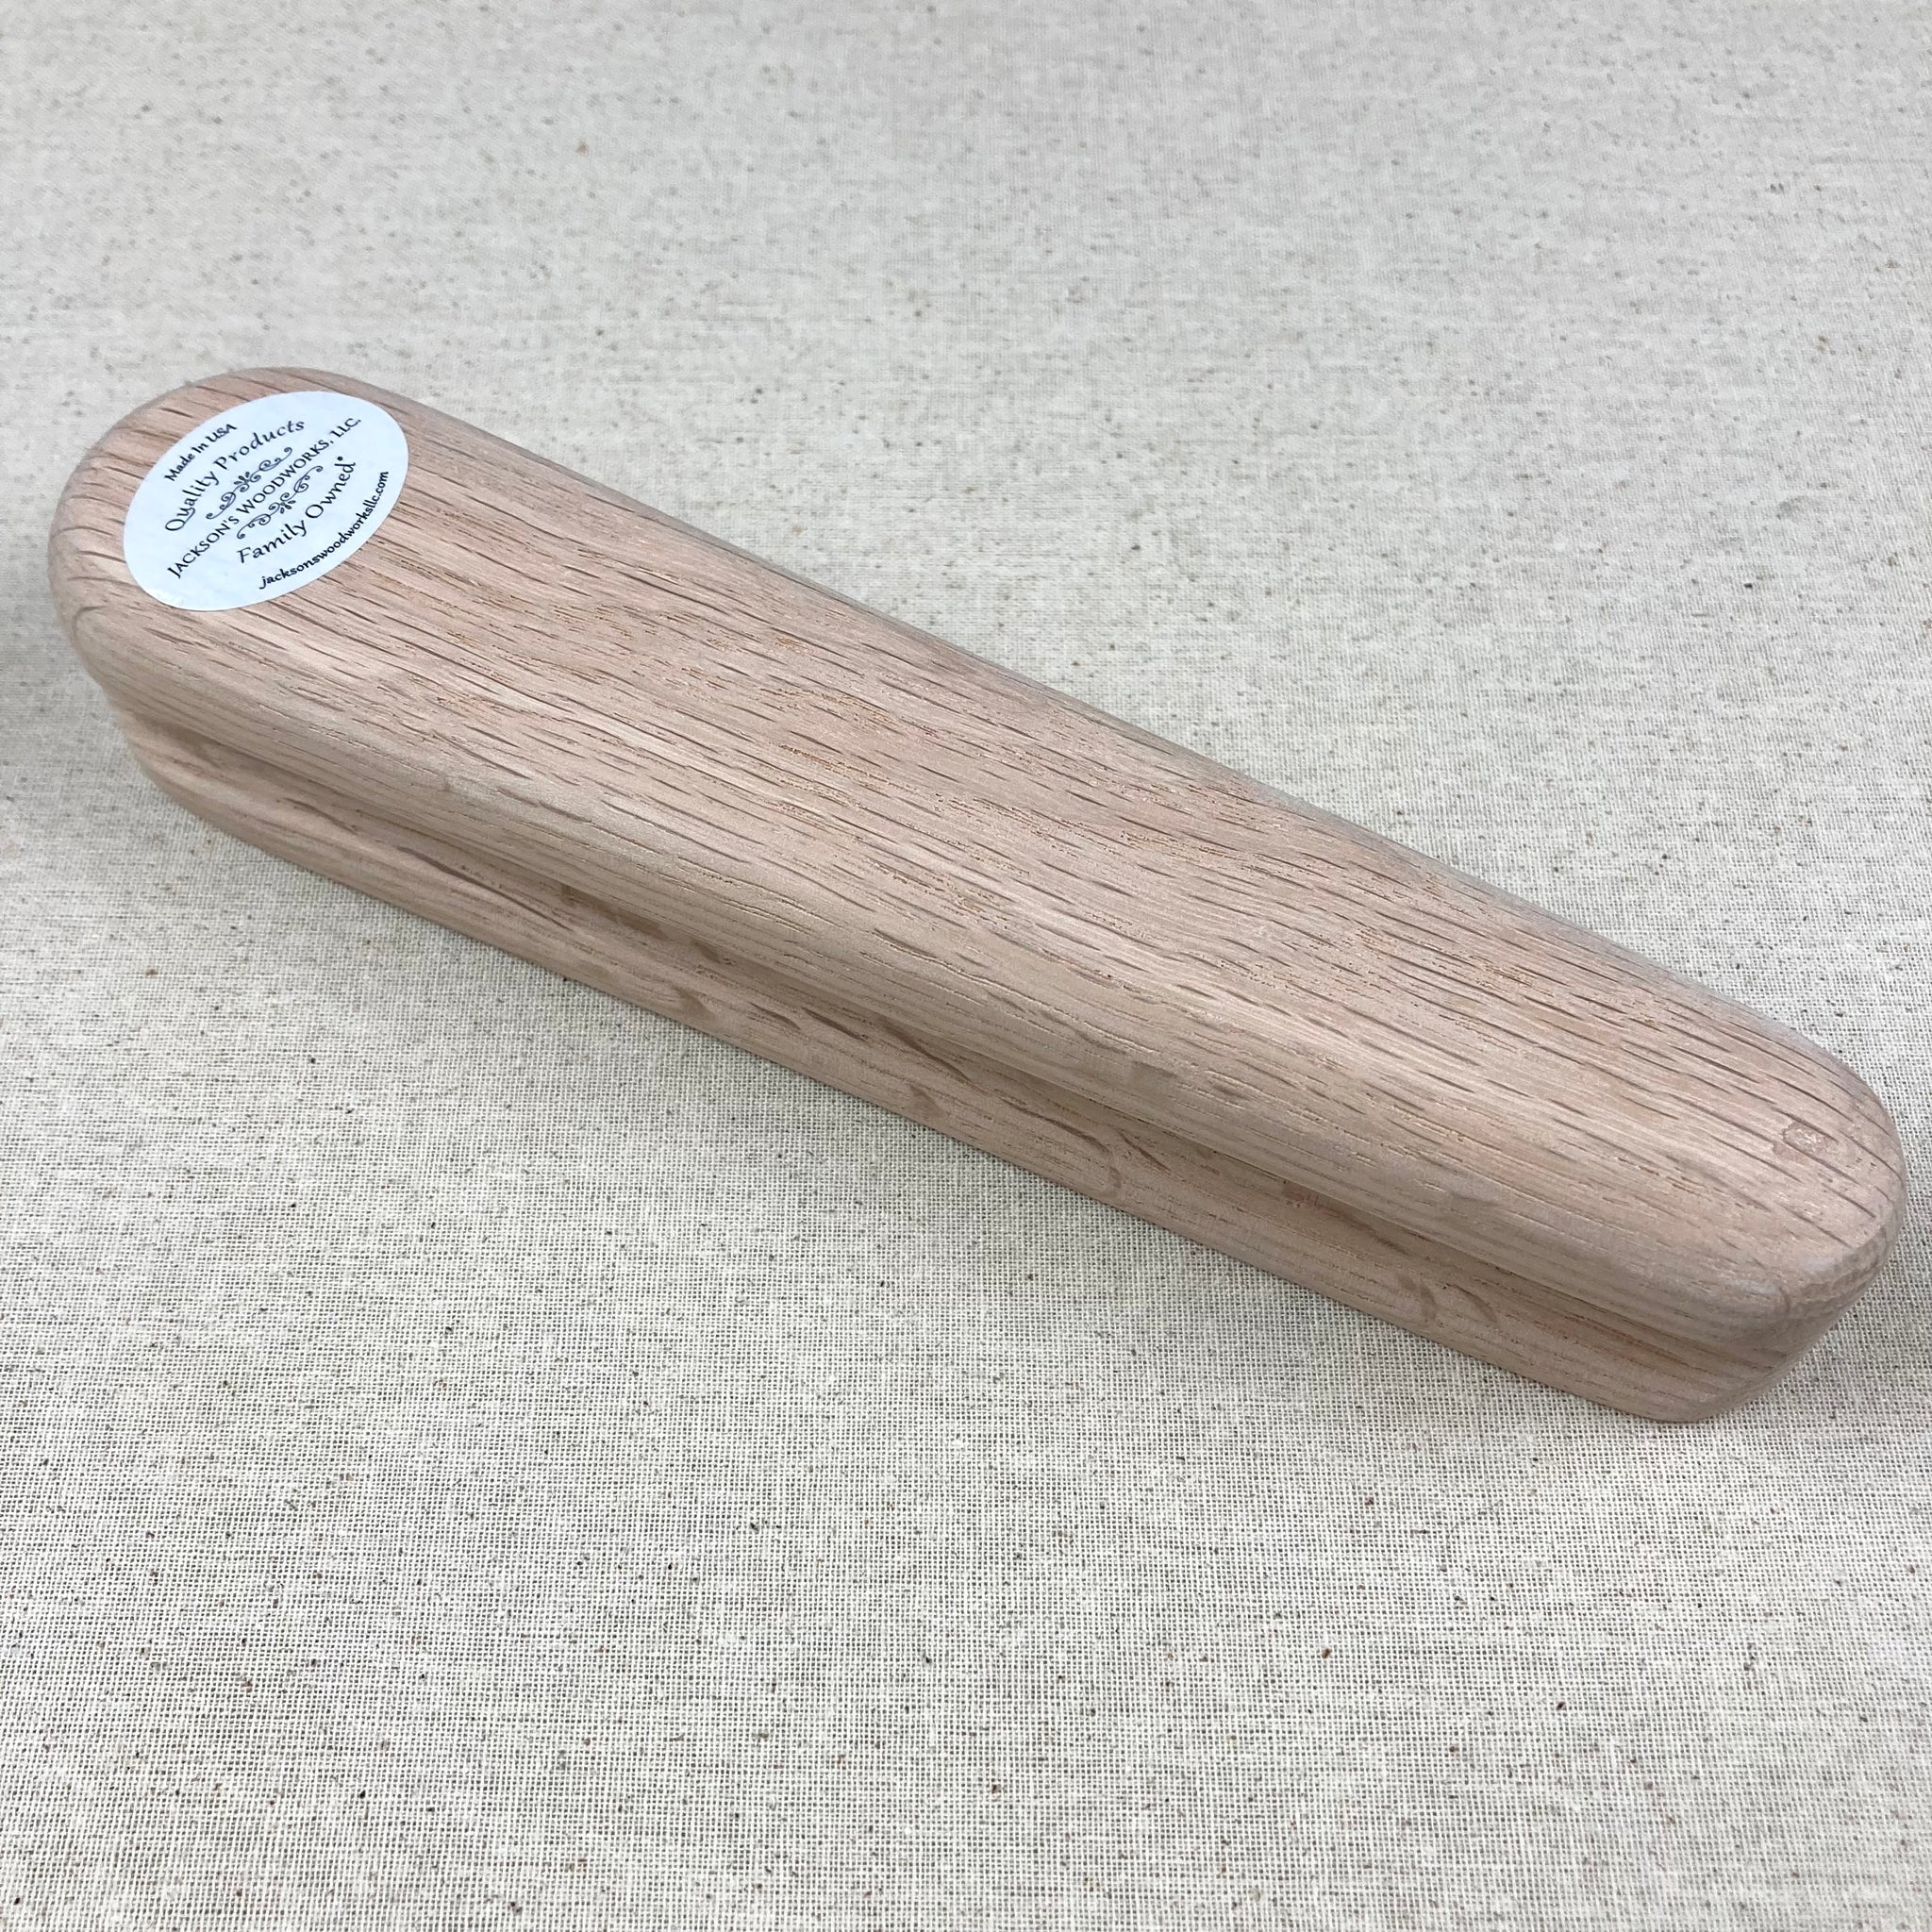 Handmade Rustic Wood Tailor's Clapper - Locally Handmade Sewing